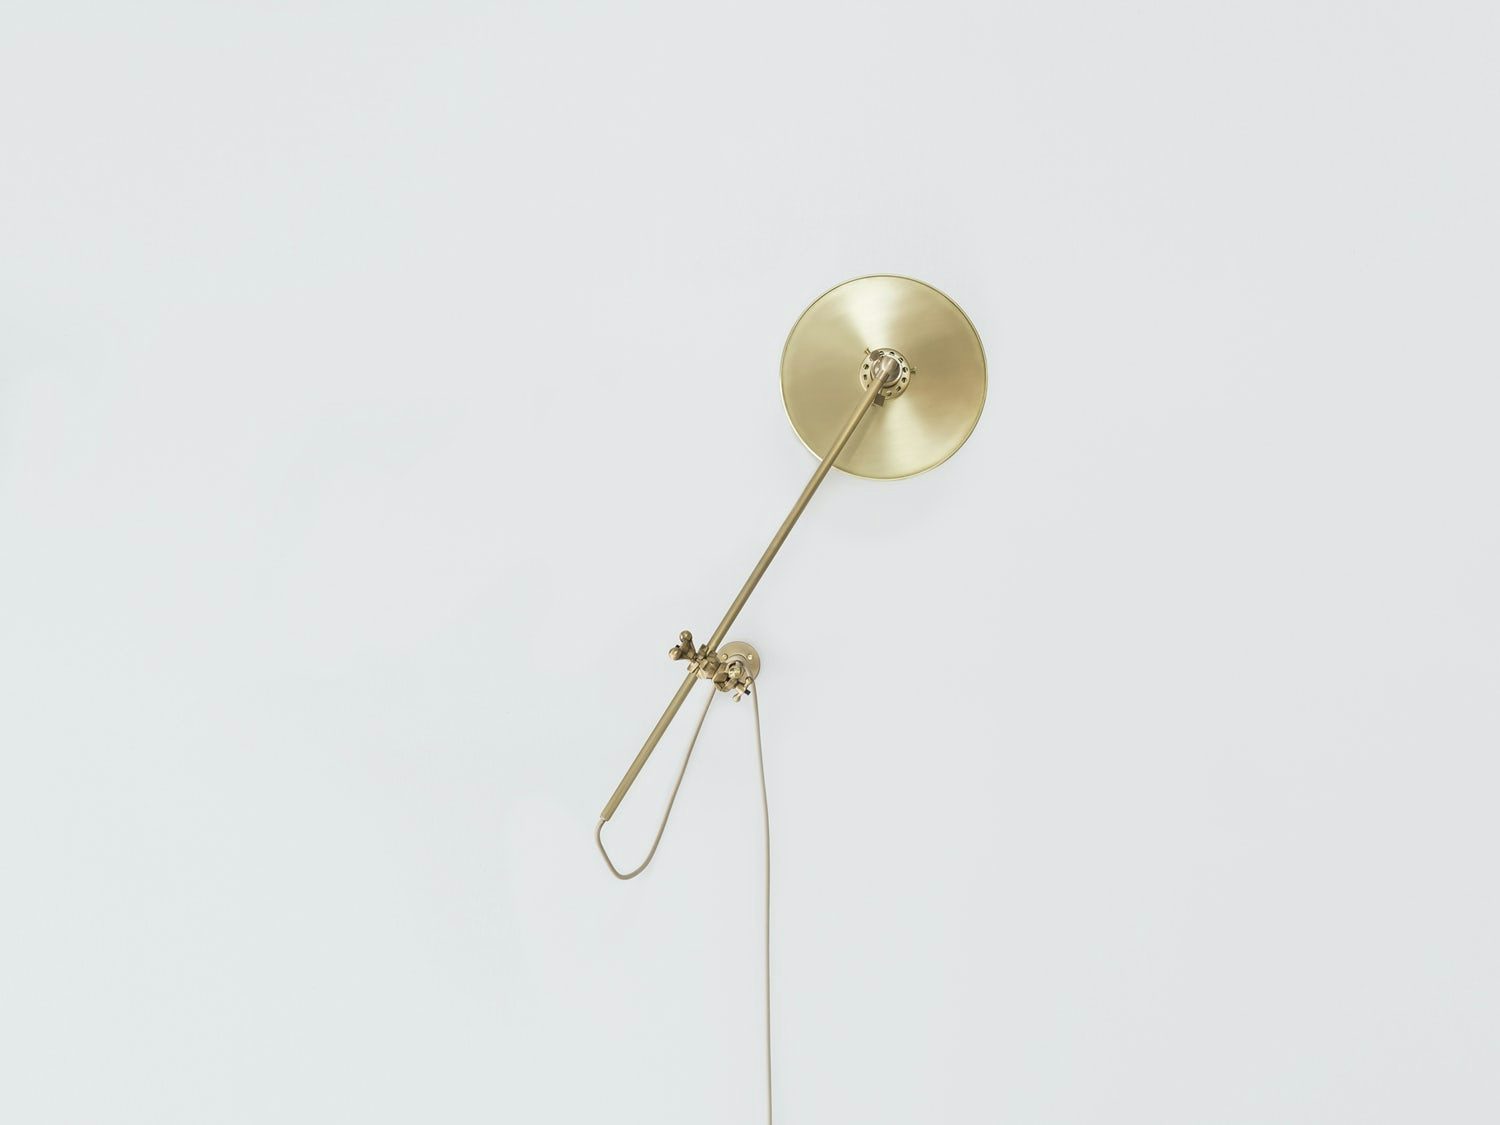 gallery image for Brass-Wall-Lamp_Up